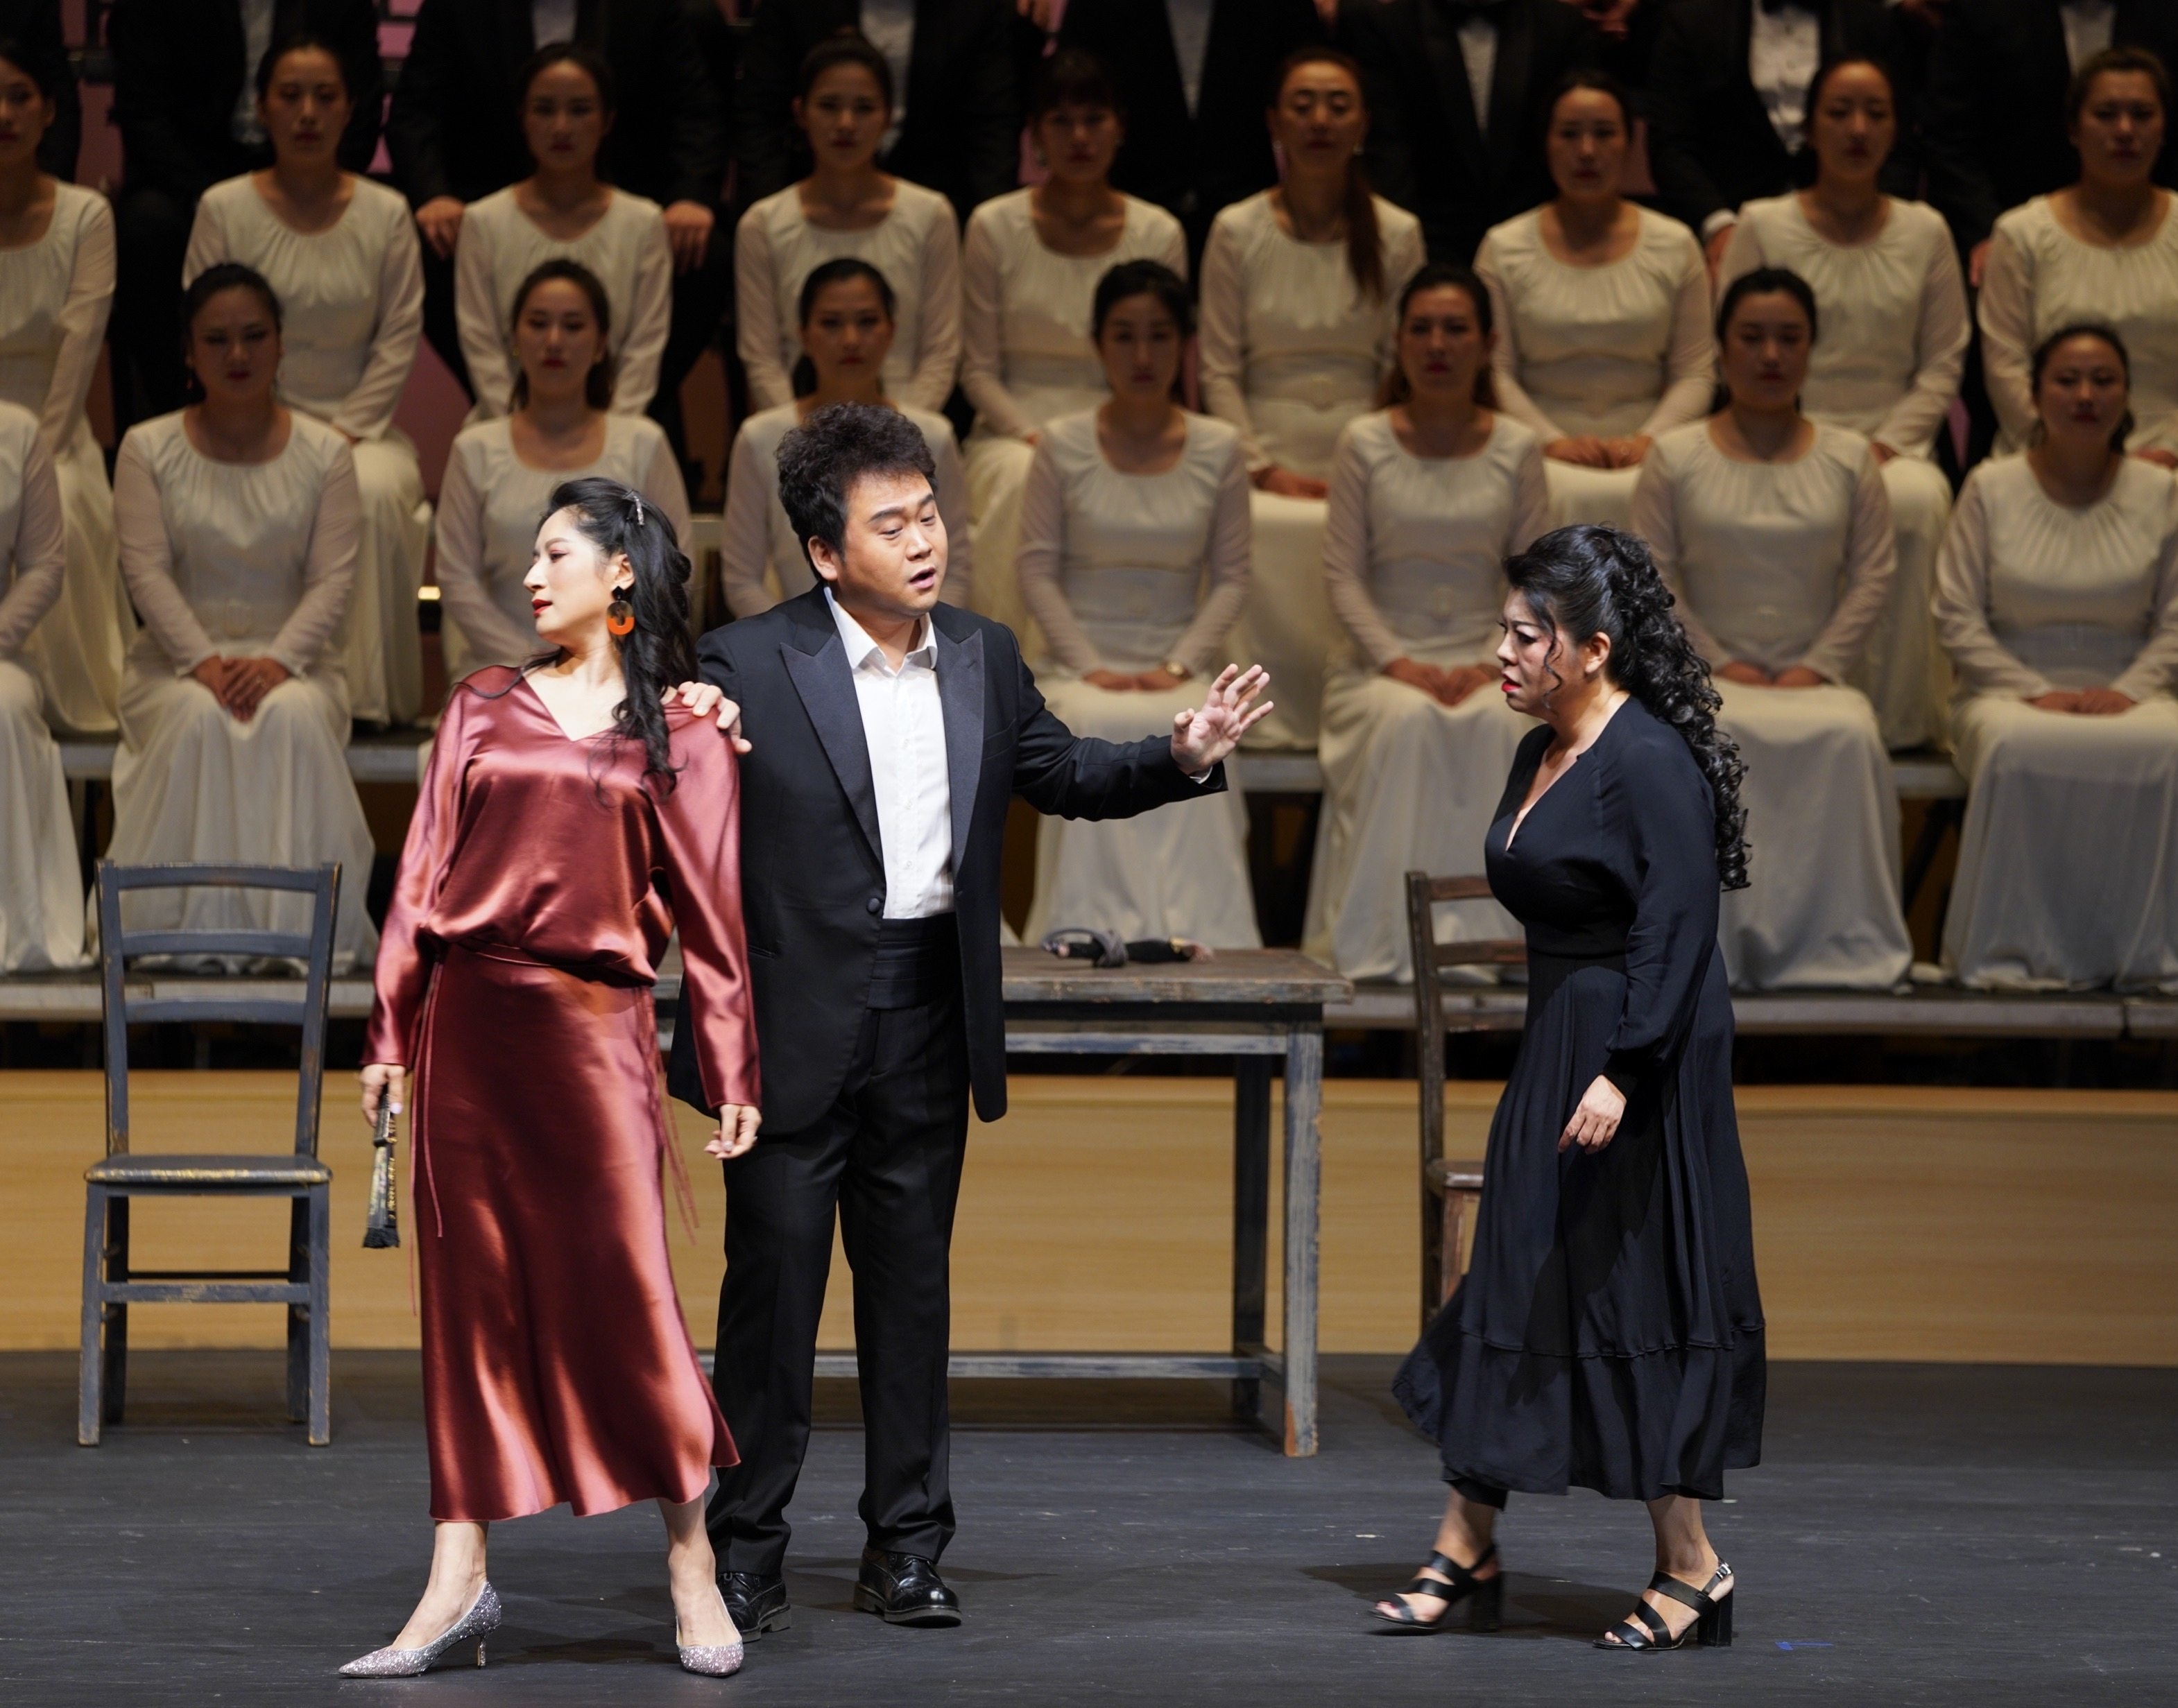 Shanghai Opera House cast members (from left) Dong Fang, Xue Haoyin and He Hui and choir in a scene from Mascagni’s opera Cavalleria Rusticana, streamed by Hong Kong Arts Festival. Photo; Cao Jiamial/Chen Yulin